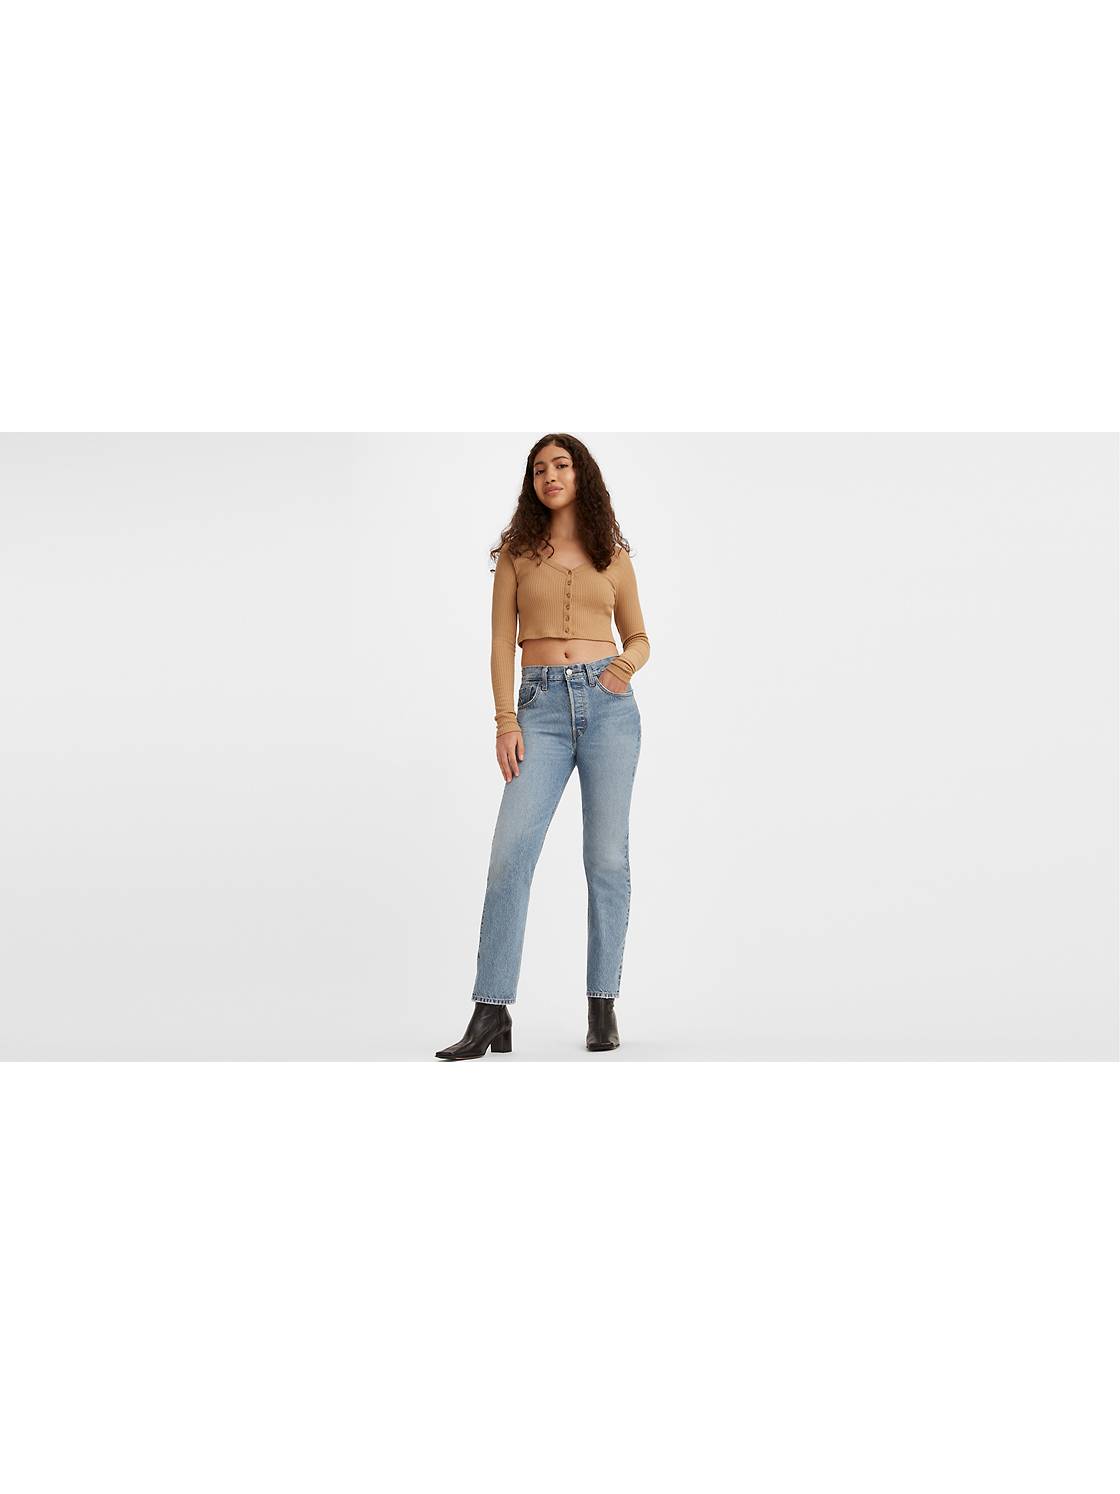 High-Waisted Jeans - Women's High-Rise Jeans & Pants | US